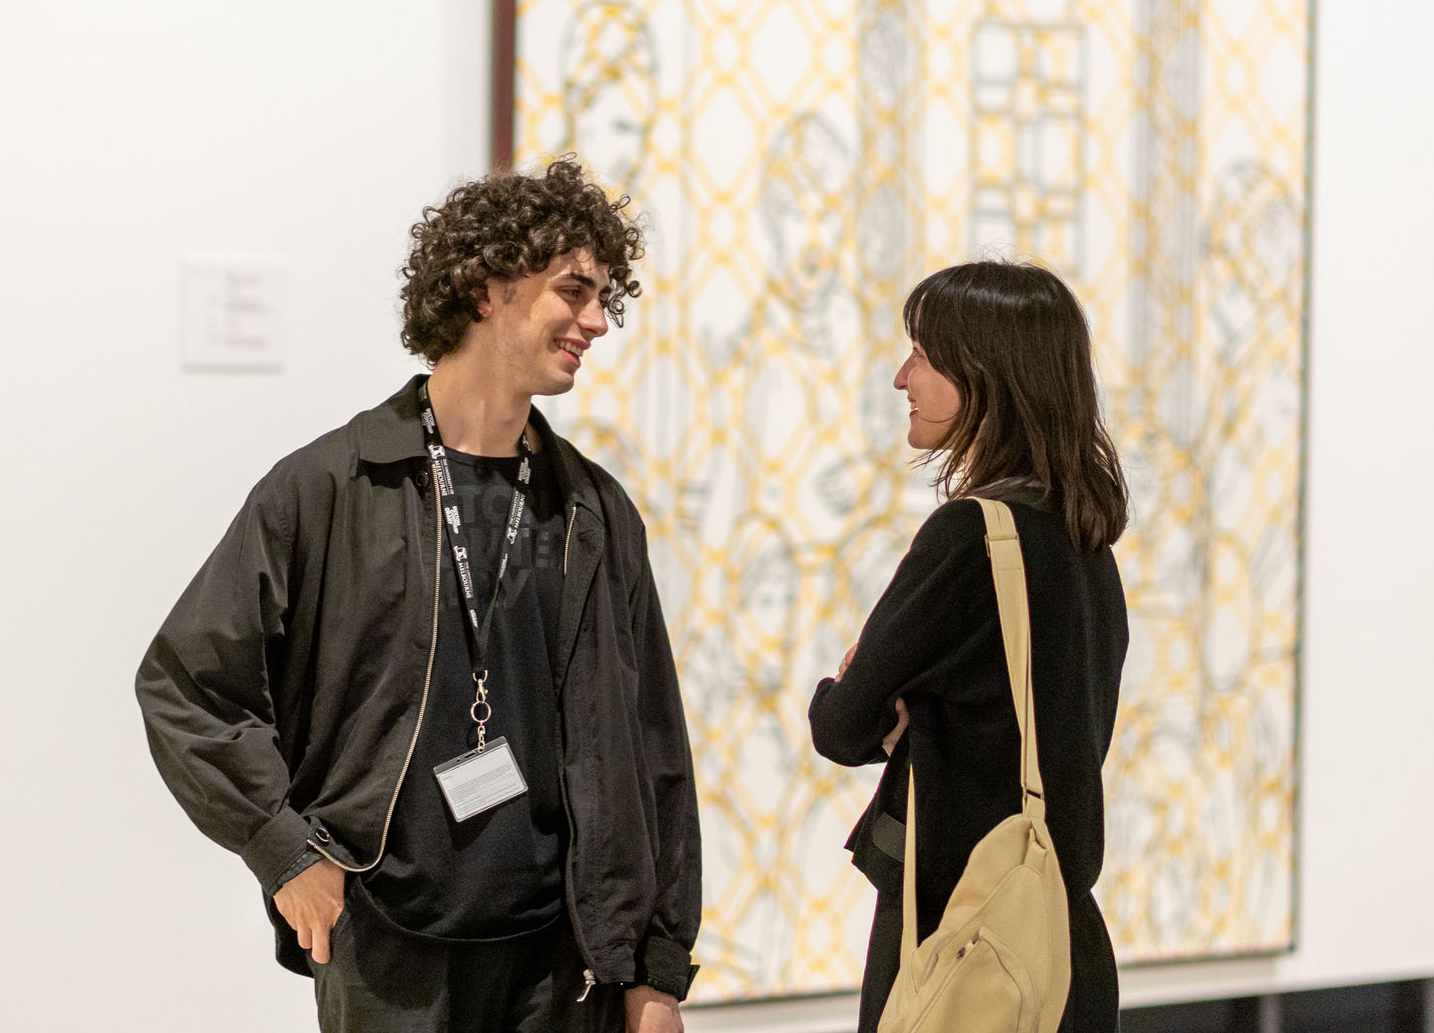 A student speaks to a visitor in the gallery